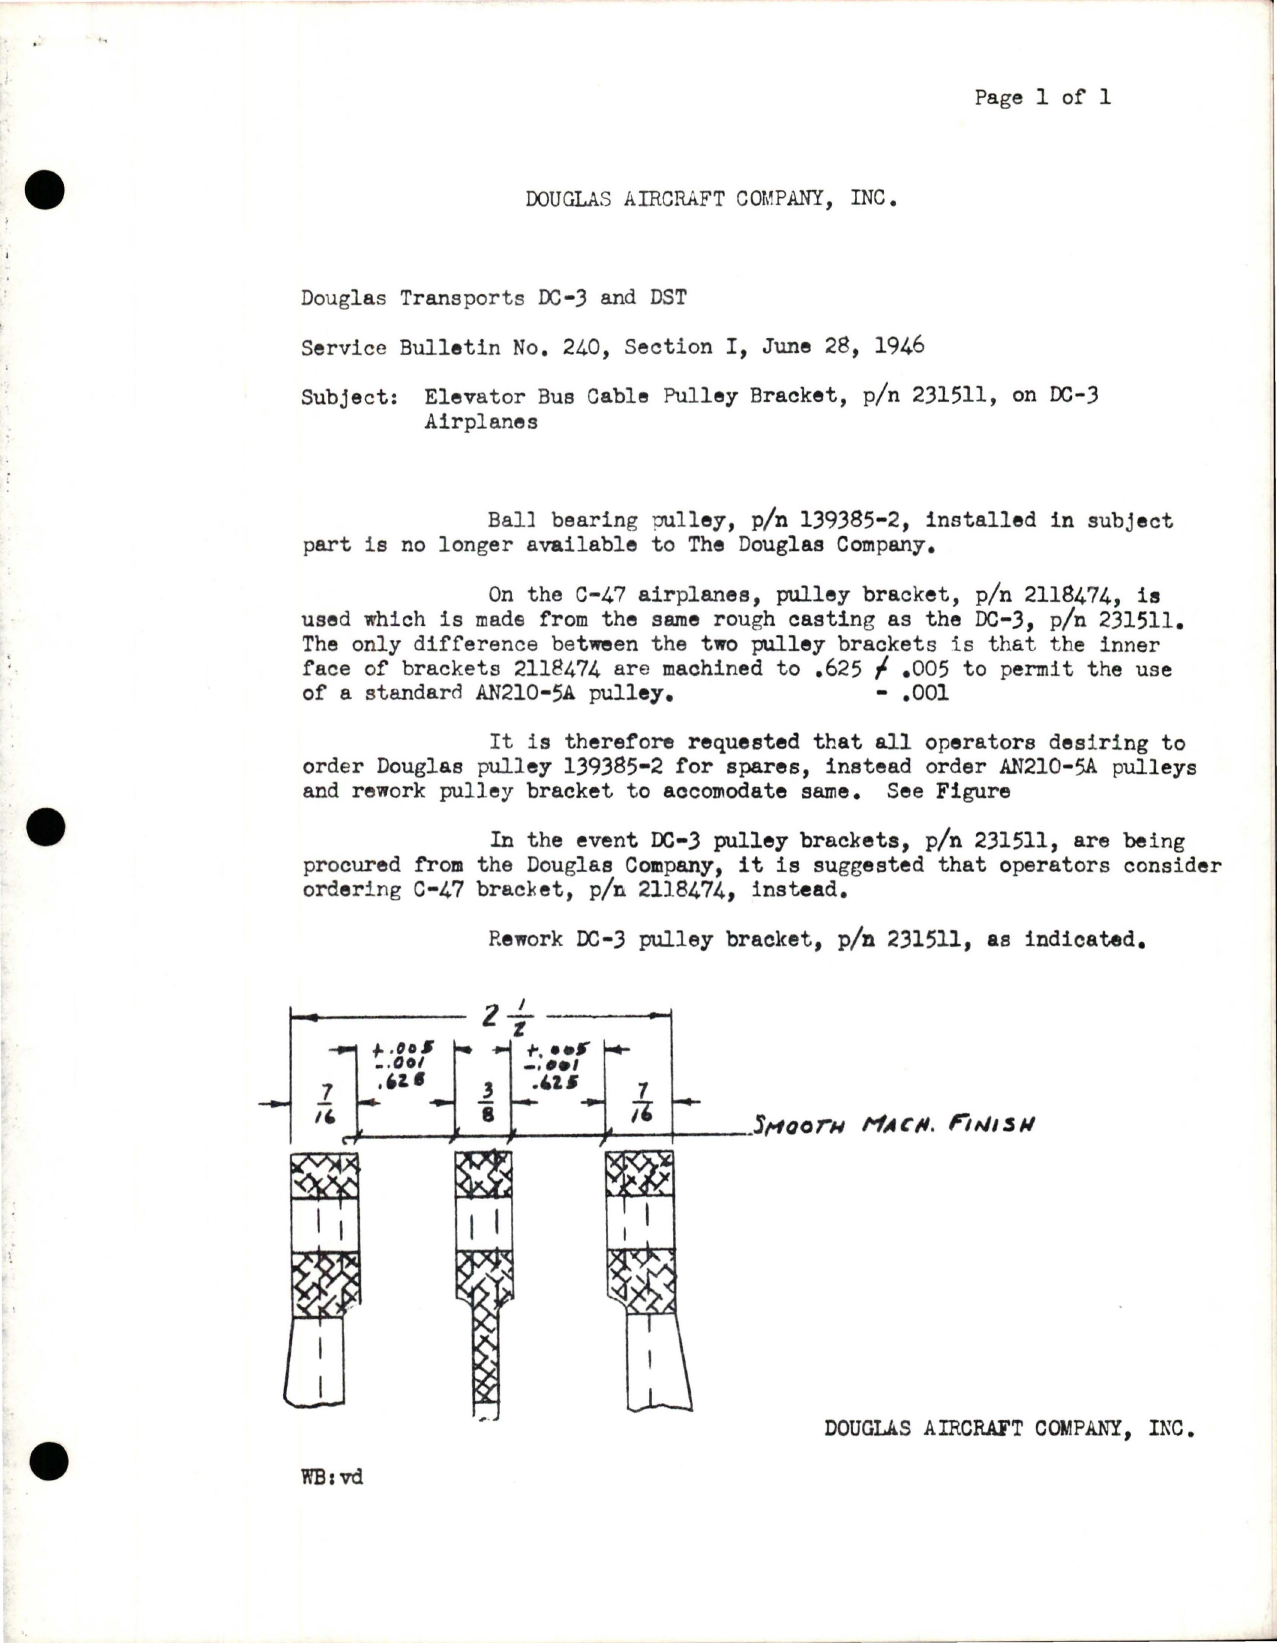 Sample page 1 from AirCorps Library document: Elevator Bus Cable Pulley Bracket - Part 231511